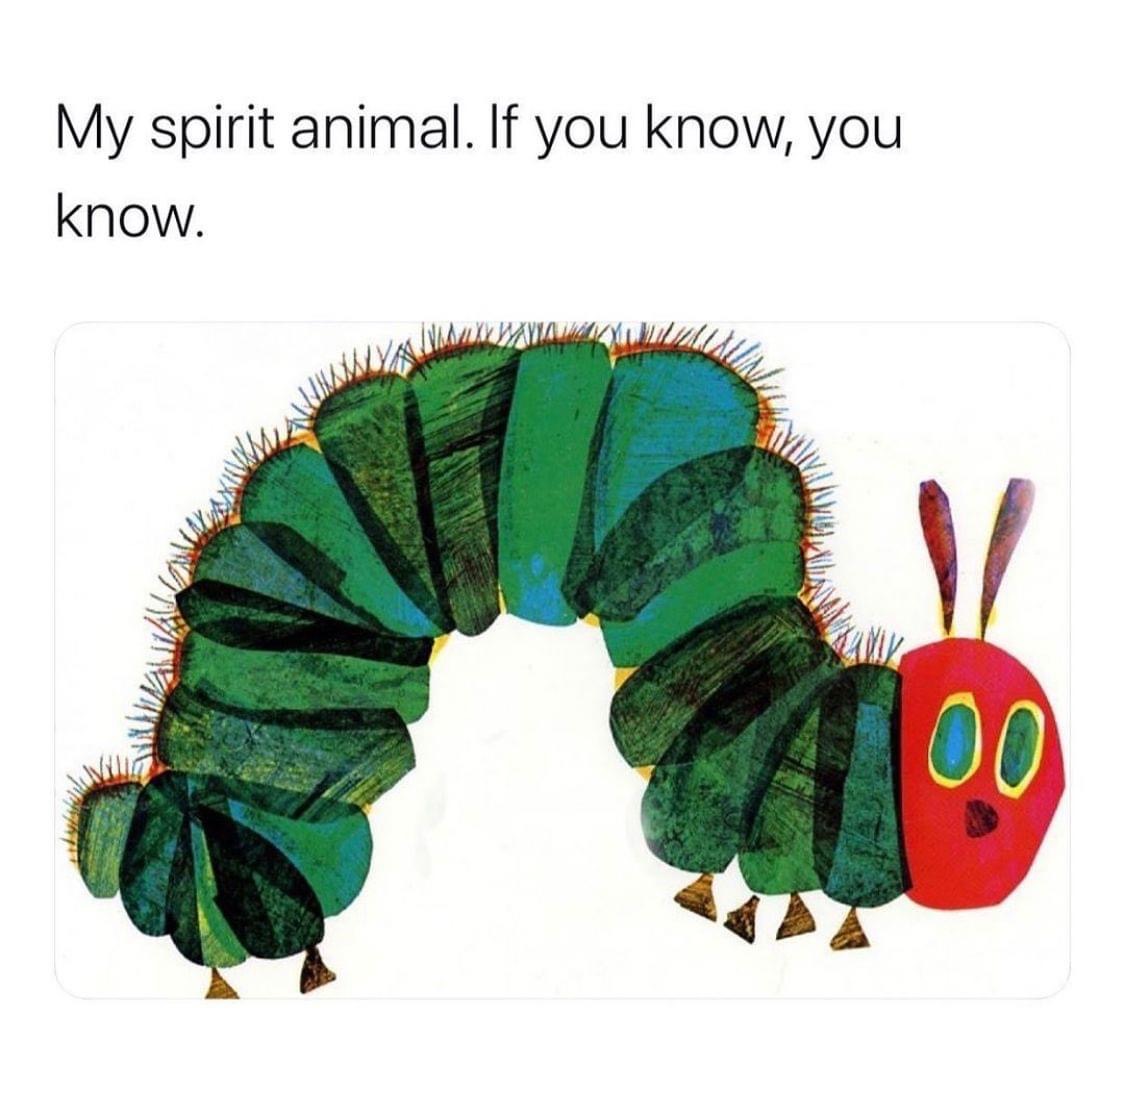 very hungry caterpillar book - My spirit animal. If you know, you know. 00